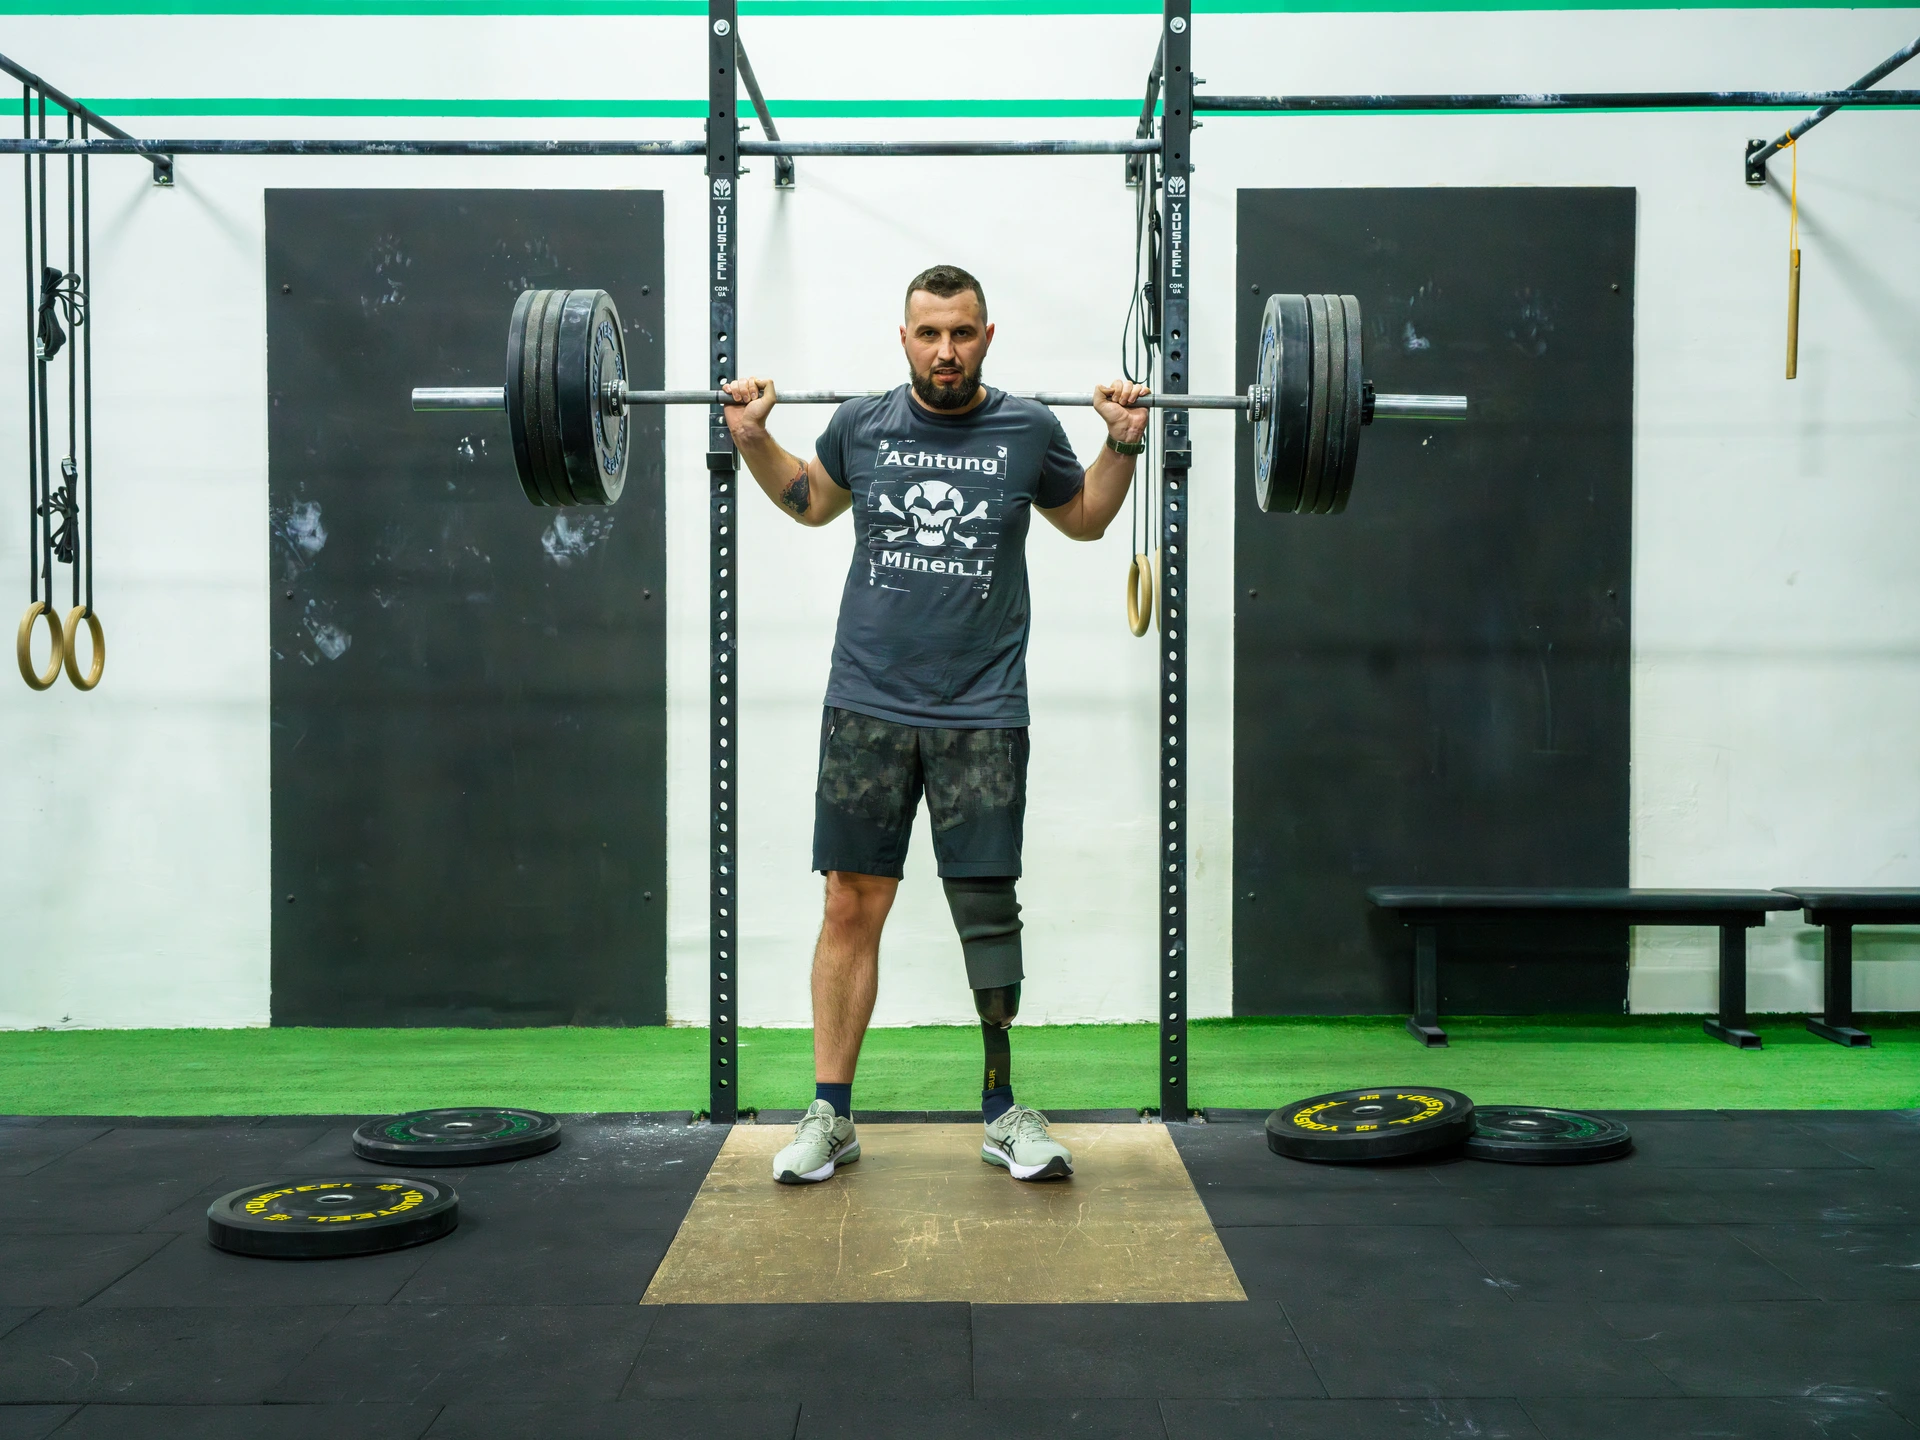 In a gymnasium, a man stands on padded flooring holding a weight lifting bar over his shoulders with several weights connected on both sides of the bar. He is wearing a t-shirt with a white skull and crossbones between the German words "Achtung Minen" printed on the front. He also has a small tattoo on his right forearm. He is wearing shorts, revealing a prosthetic left leg. Several weights are scattered on the floor around him. He is sporting a small dark beard with buzz-cut dark hair, and is staring intently at the camera with a look of defiance. This is Ihor Bezkaravainyi, the 34 year-old Deputy Minister of Economy of Ukraine and Invictus Games athlete, who lost his leg during fighting in Donetsk Oblast in 2015.